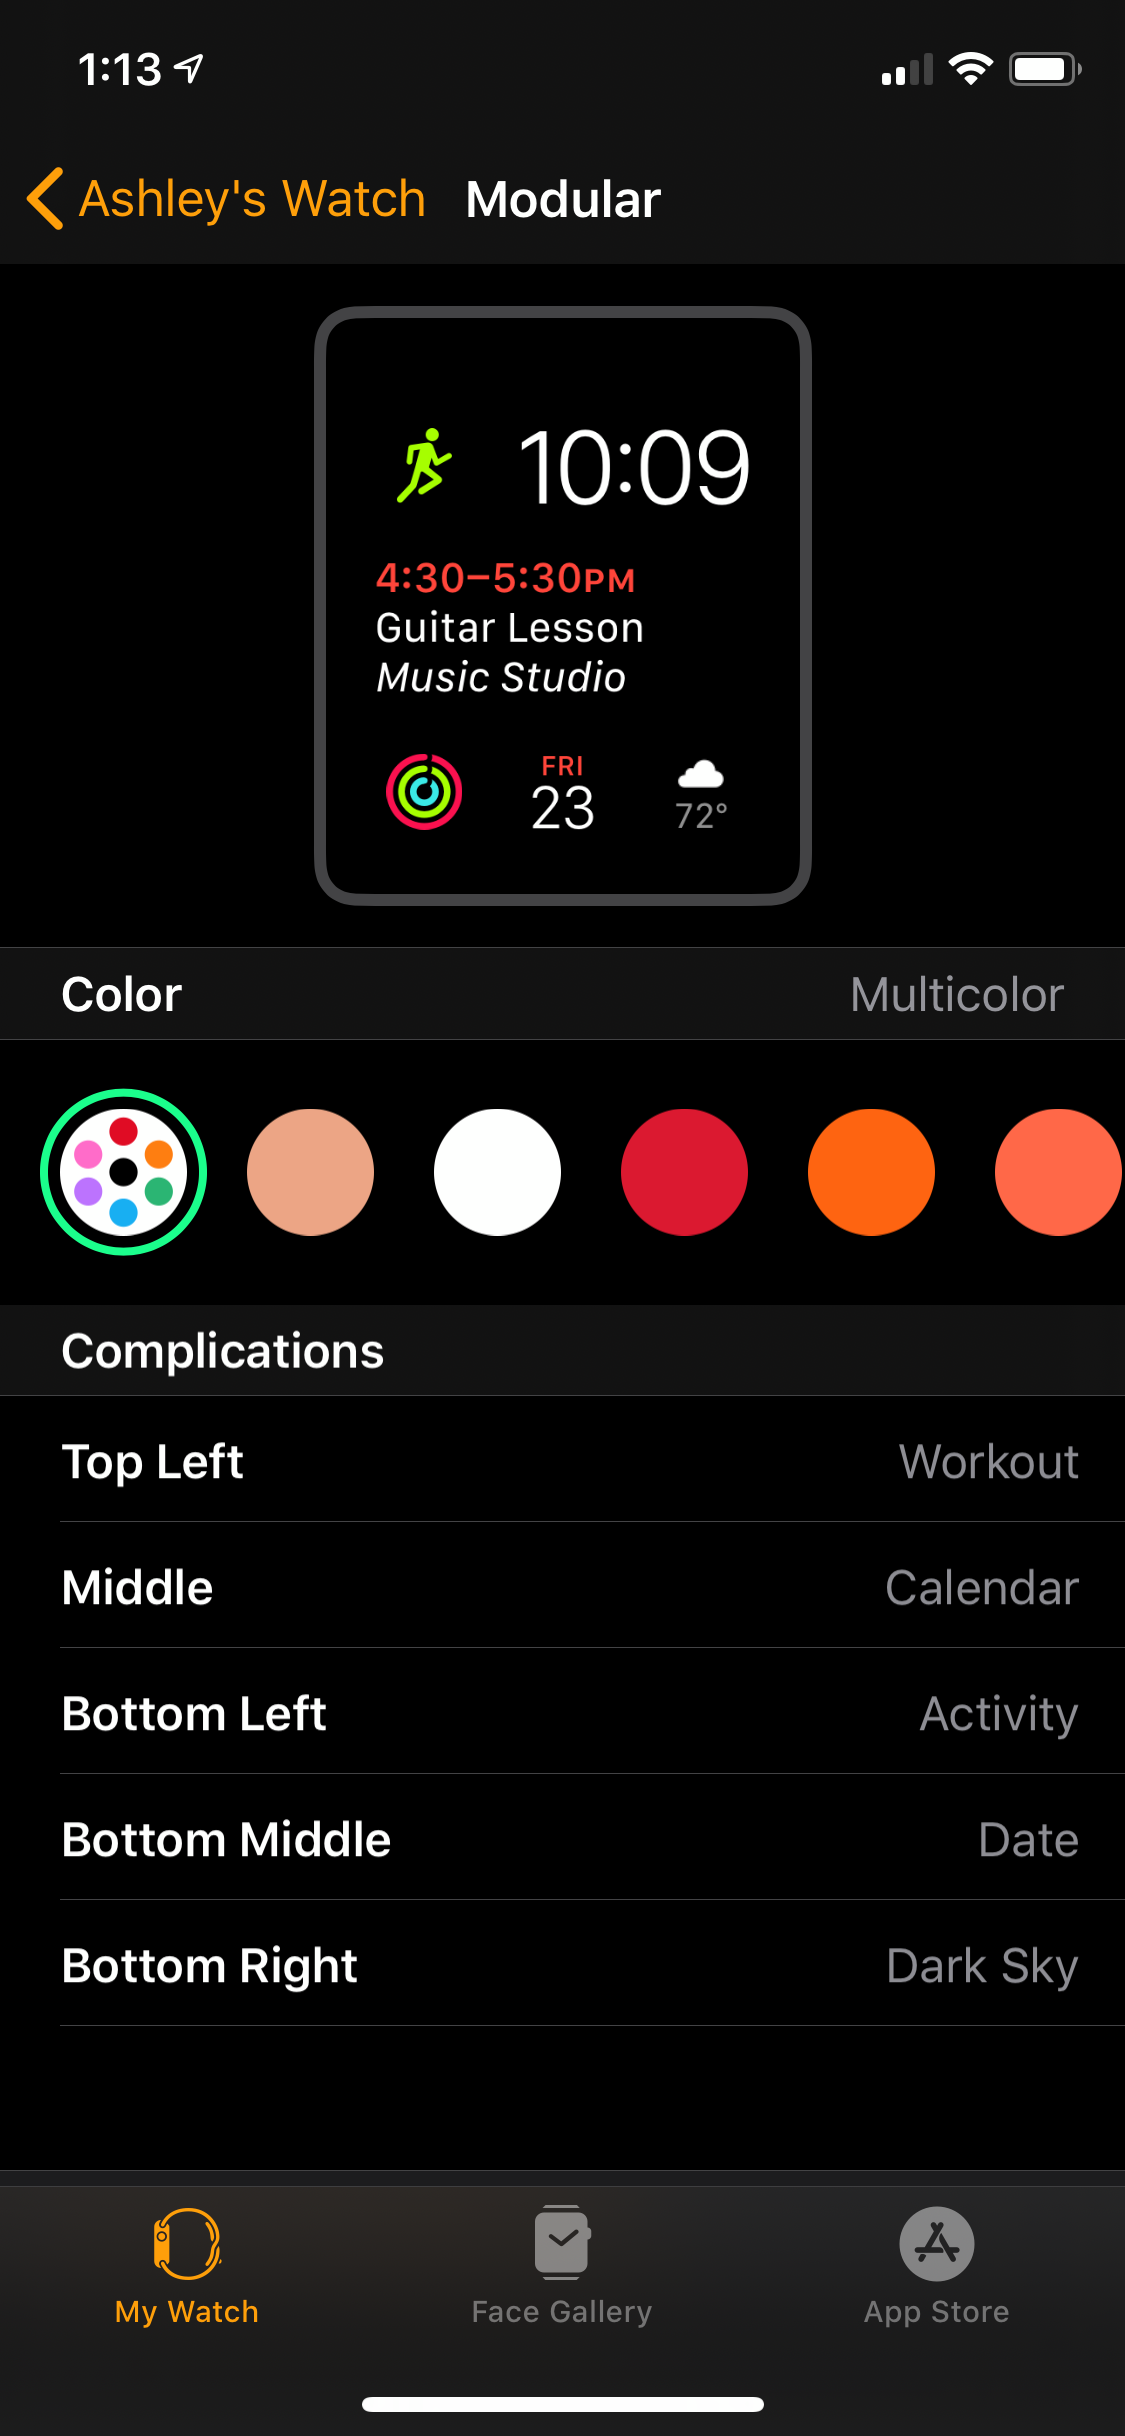 Apple Watch Calendar not Syncing to Watch Apple Community